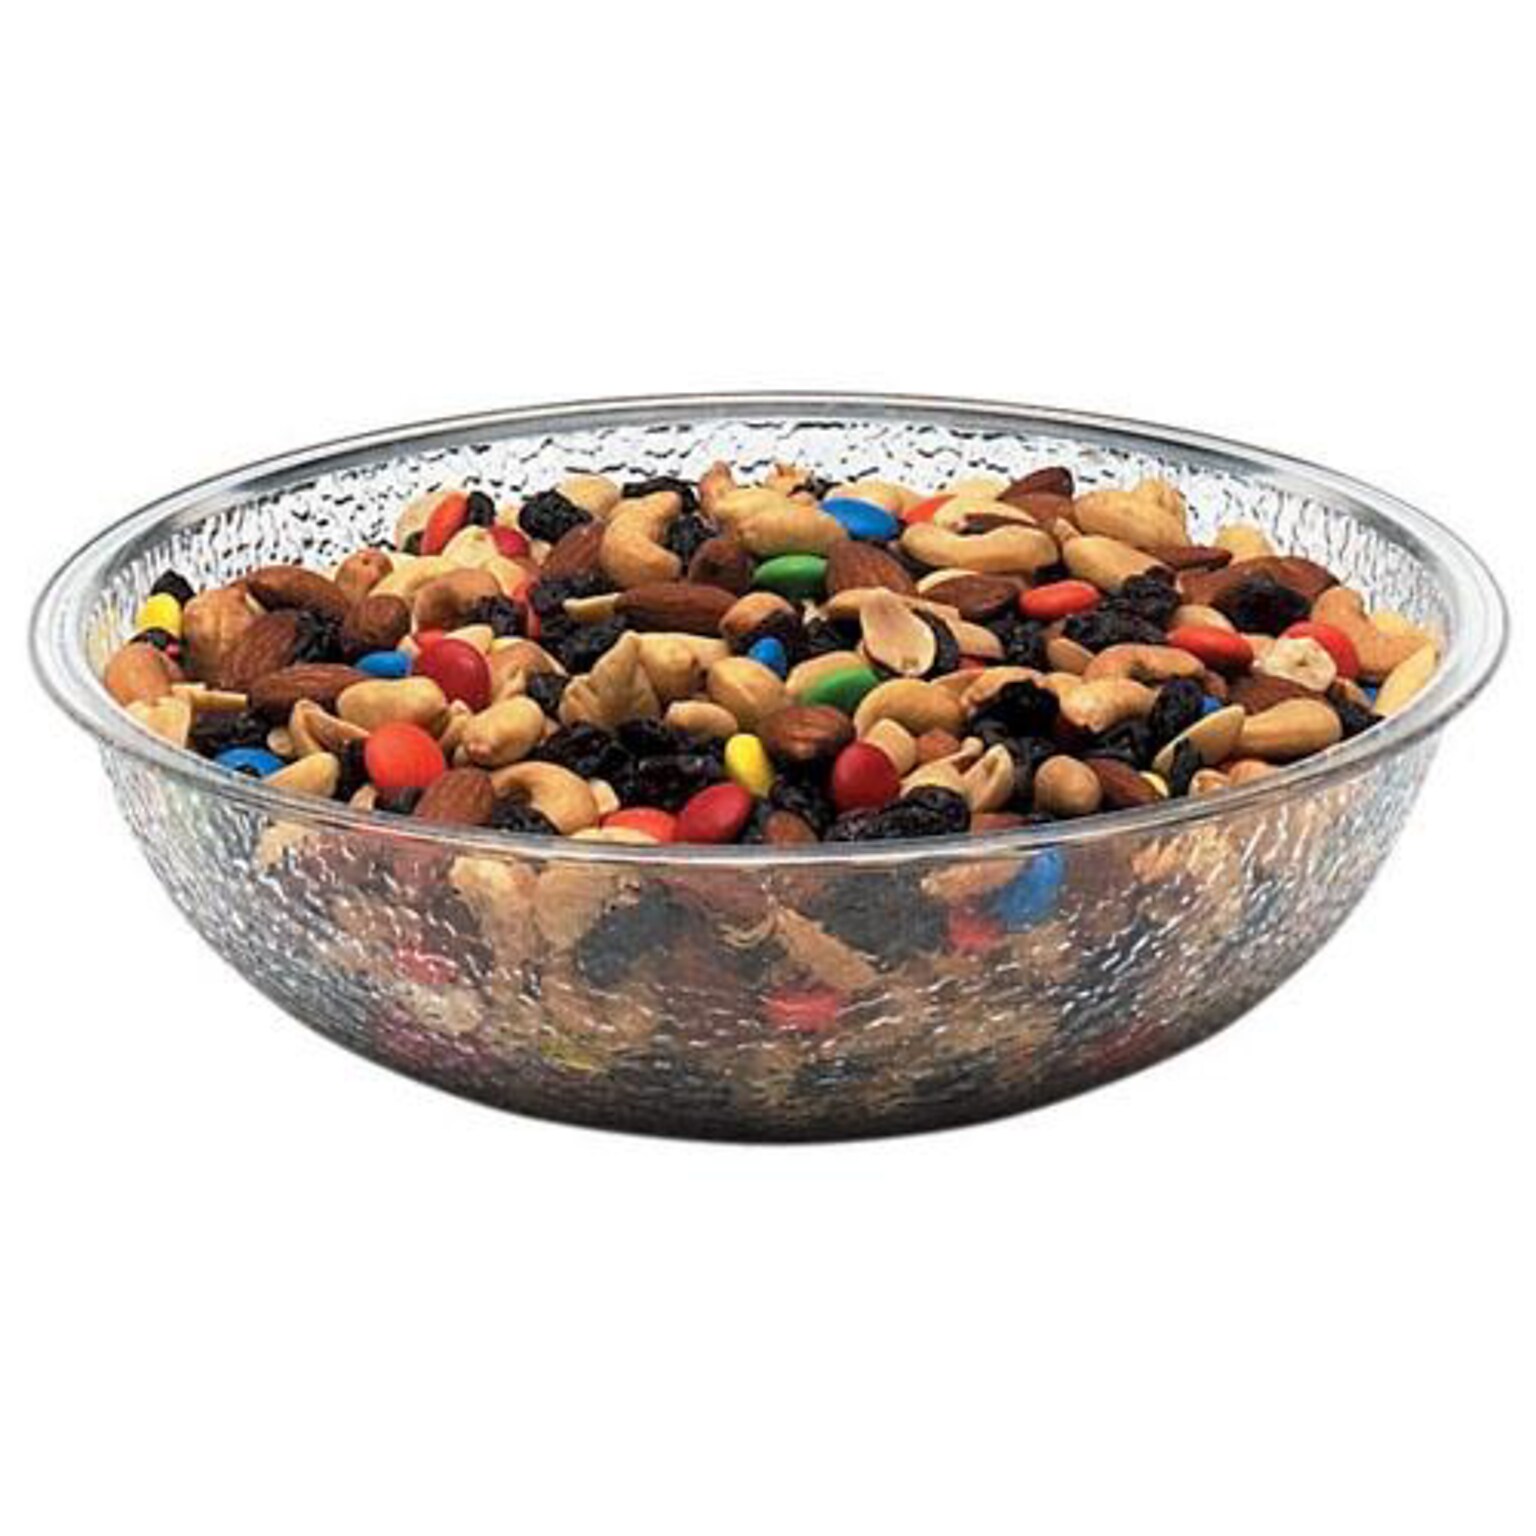 Cambro Camwear 8 Polycarbonate Pebbled Bowl, Clear (PSB8176)